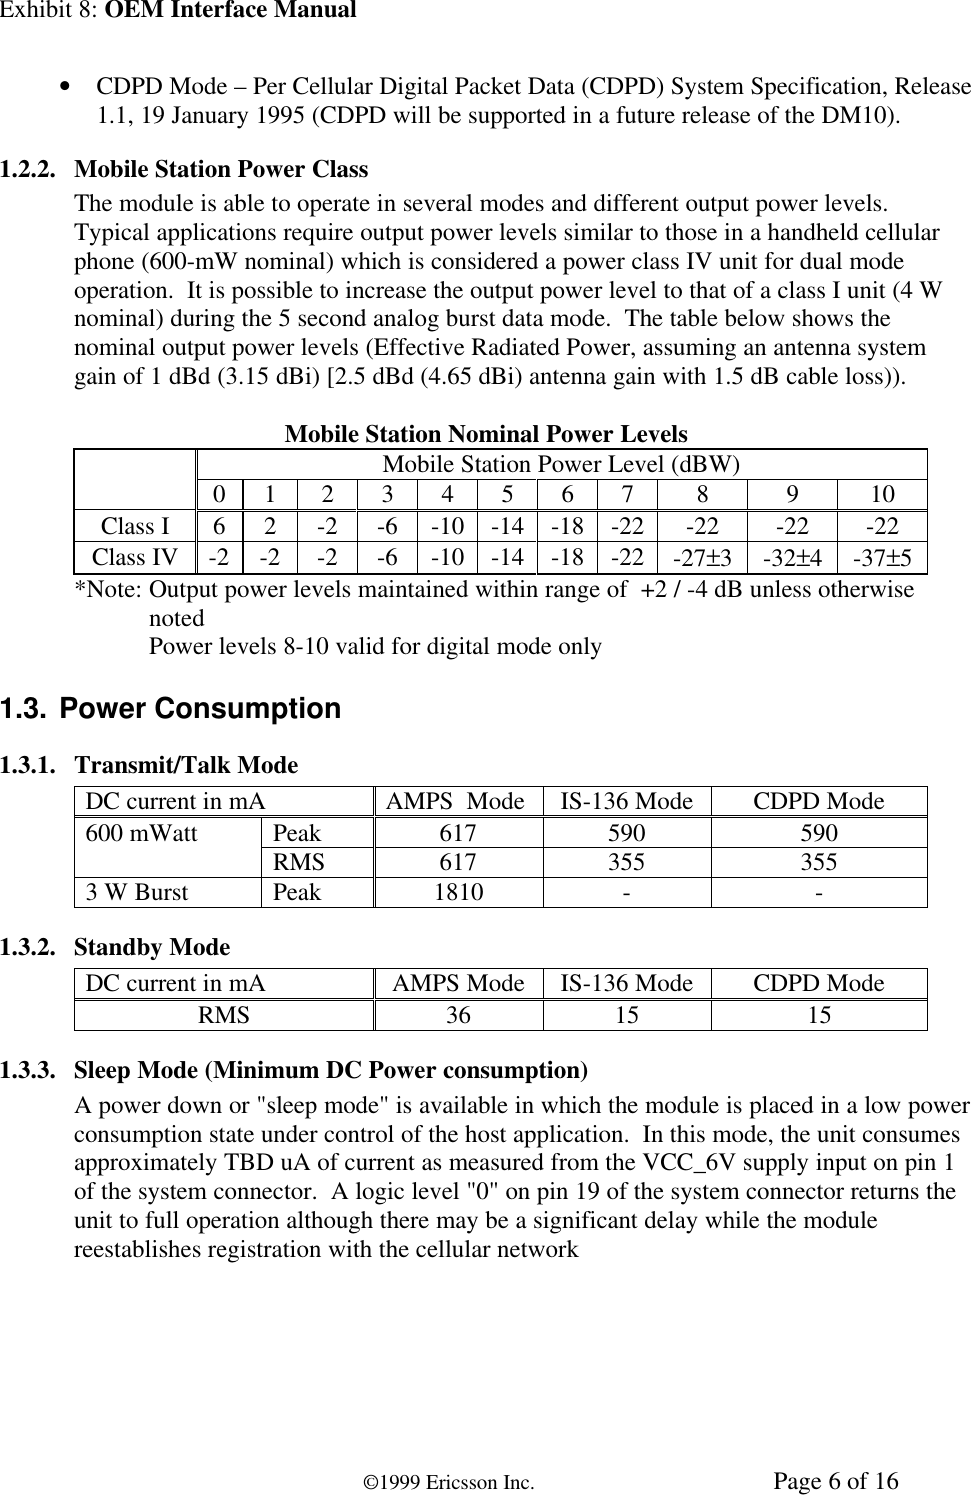 Exhibit 8: OEM Interface Manual©1999 Ericsson Inc. Page 6 of 16• CDPD Mode – Per Cellular Digital Packet Data (CDPD) System Specification, Release1.1, 19 January 1995 (CDPD will be supported in a future release of the DM10).1.2.2. Mobile Station Power ClassThe module is able to operate in several modes and different output power levels.Typical applications require output power levels similar to those in a handheld cellularphone (600-mW nominal) which is considered a power class IV unit for dual modeoperation.  It is possible to increase the output power level to that of a class I unit (4 Wnominal) during the 5 second analog burst data mode.  The table below shows thenominal output power levels (Effective Radiated Power, assuming an antenna systemgain of 1 dBd (3.15 dBi) [2.5 dBd (4.65 dBi) antenna gain with 1.5 dB cable loss)).Mobile Station Nominal Power LevelsMobile Station Power Level (dBW)0 1 2 3 4 5 6 7 8 9 10Class I 6 2 -2 -6 -10 -14 -18 -22 -22 -22 -22Class IV -2 -2 -2 -6 -10 -14 -18 -22 -27±3-32±4-37±5*Note: Output power levels maintained within range of  +2 / -4 dB unless otherwisenotedPower levels 8-10 valid for digital mode only1.3. Power Consumption1.3.1. Transmit/Talk ModeDC current in mA AMPS  Mode IS-136 Mode CDPD ModePeak 617 590 590600 mWatt RMS 617 355 3553 W Burst Peak 1810 - -1.3.2. Standby ModeDC current in mA AMPS Mode IS-136 Mode CDPD ModeRMS 36 15 151.3.3. Sleep Mode (Minimum DC Power consumption)A power down or &quot;sleep mode&quot; is available in which the module is placed in a low powerconsumption state under control of the host application.  In this mode, the unit consumesapproximately TBD uA of current as measured from the VCC_6V supply input on pin 1of the system connector.  A logic level &quot;0&quot; on pin 19 of the system connector returns theunit to full operation although there may be a significant delay while the modulereestablishes registration with the cellular network